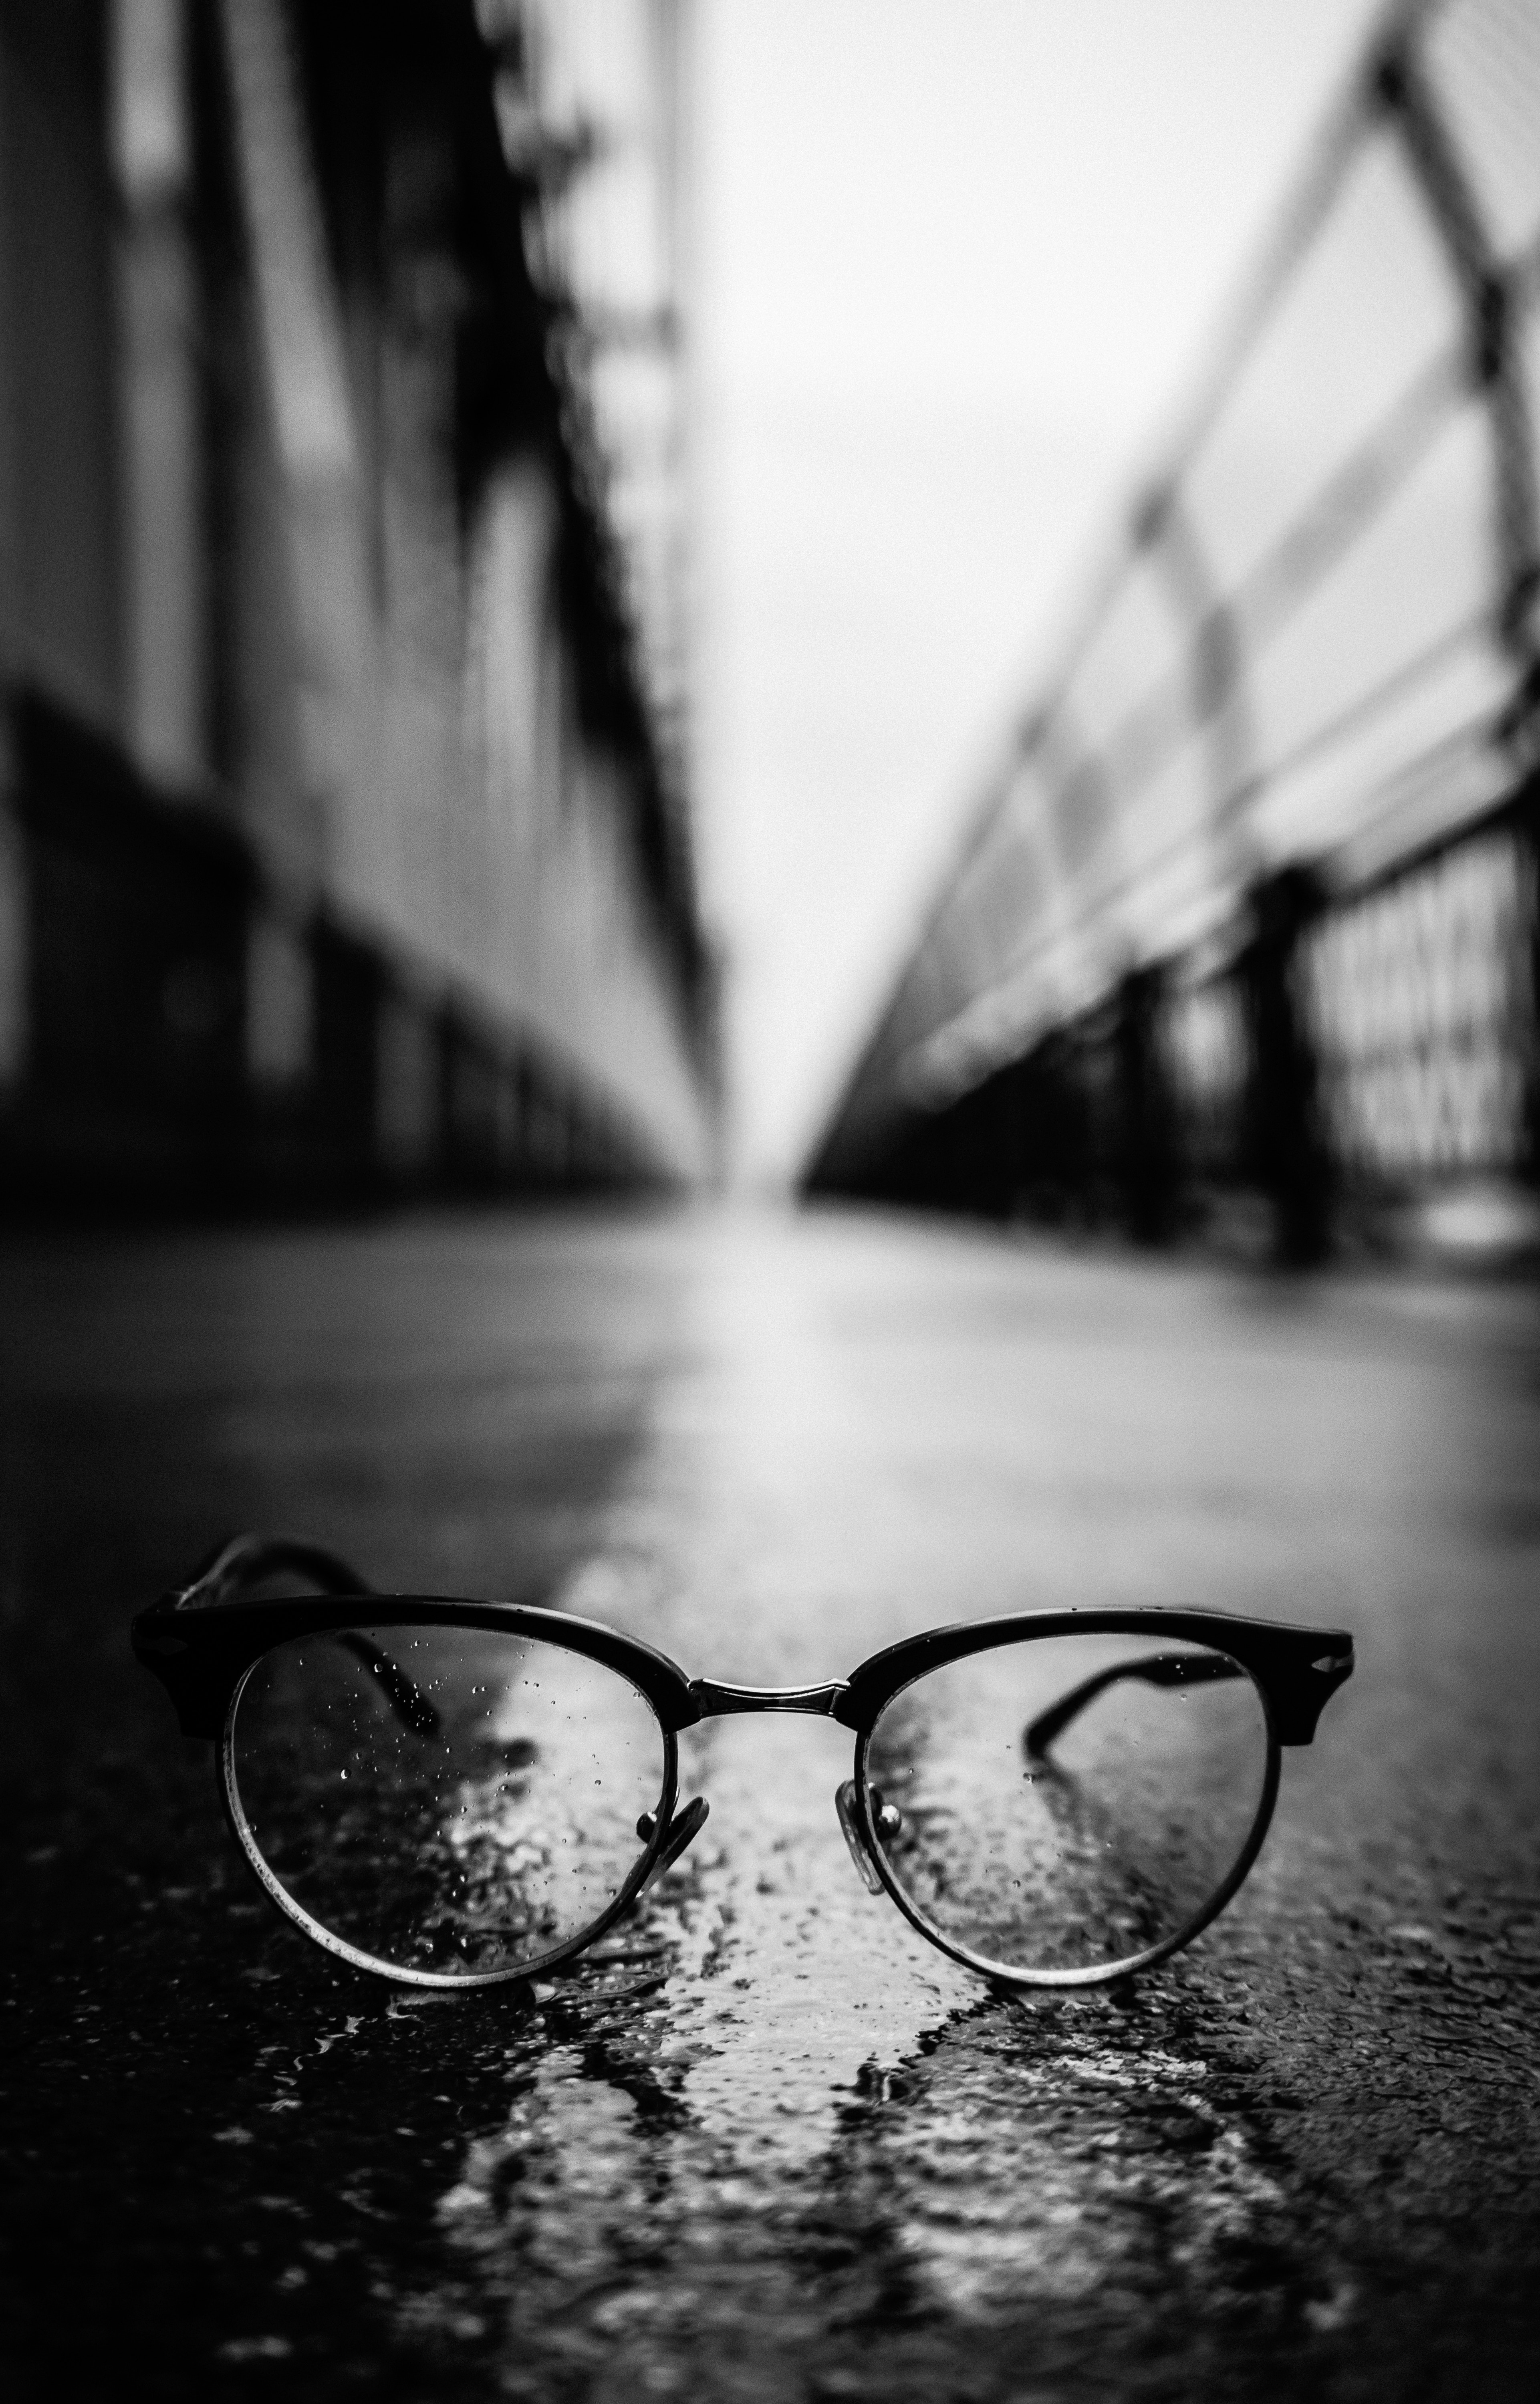 bw, close up, dark, chb, glasses, spectacles